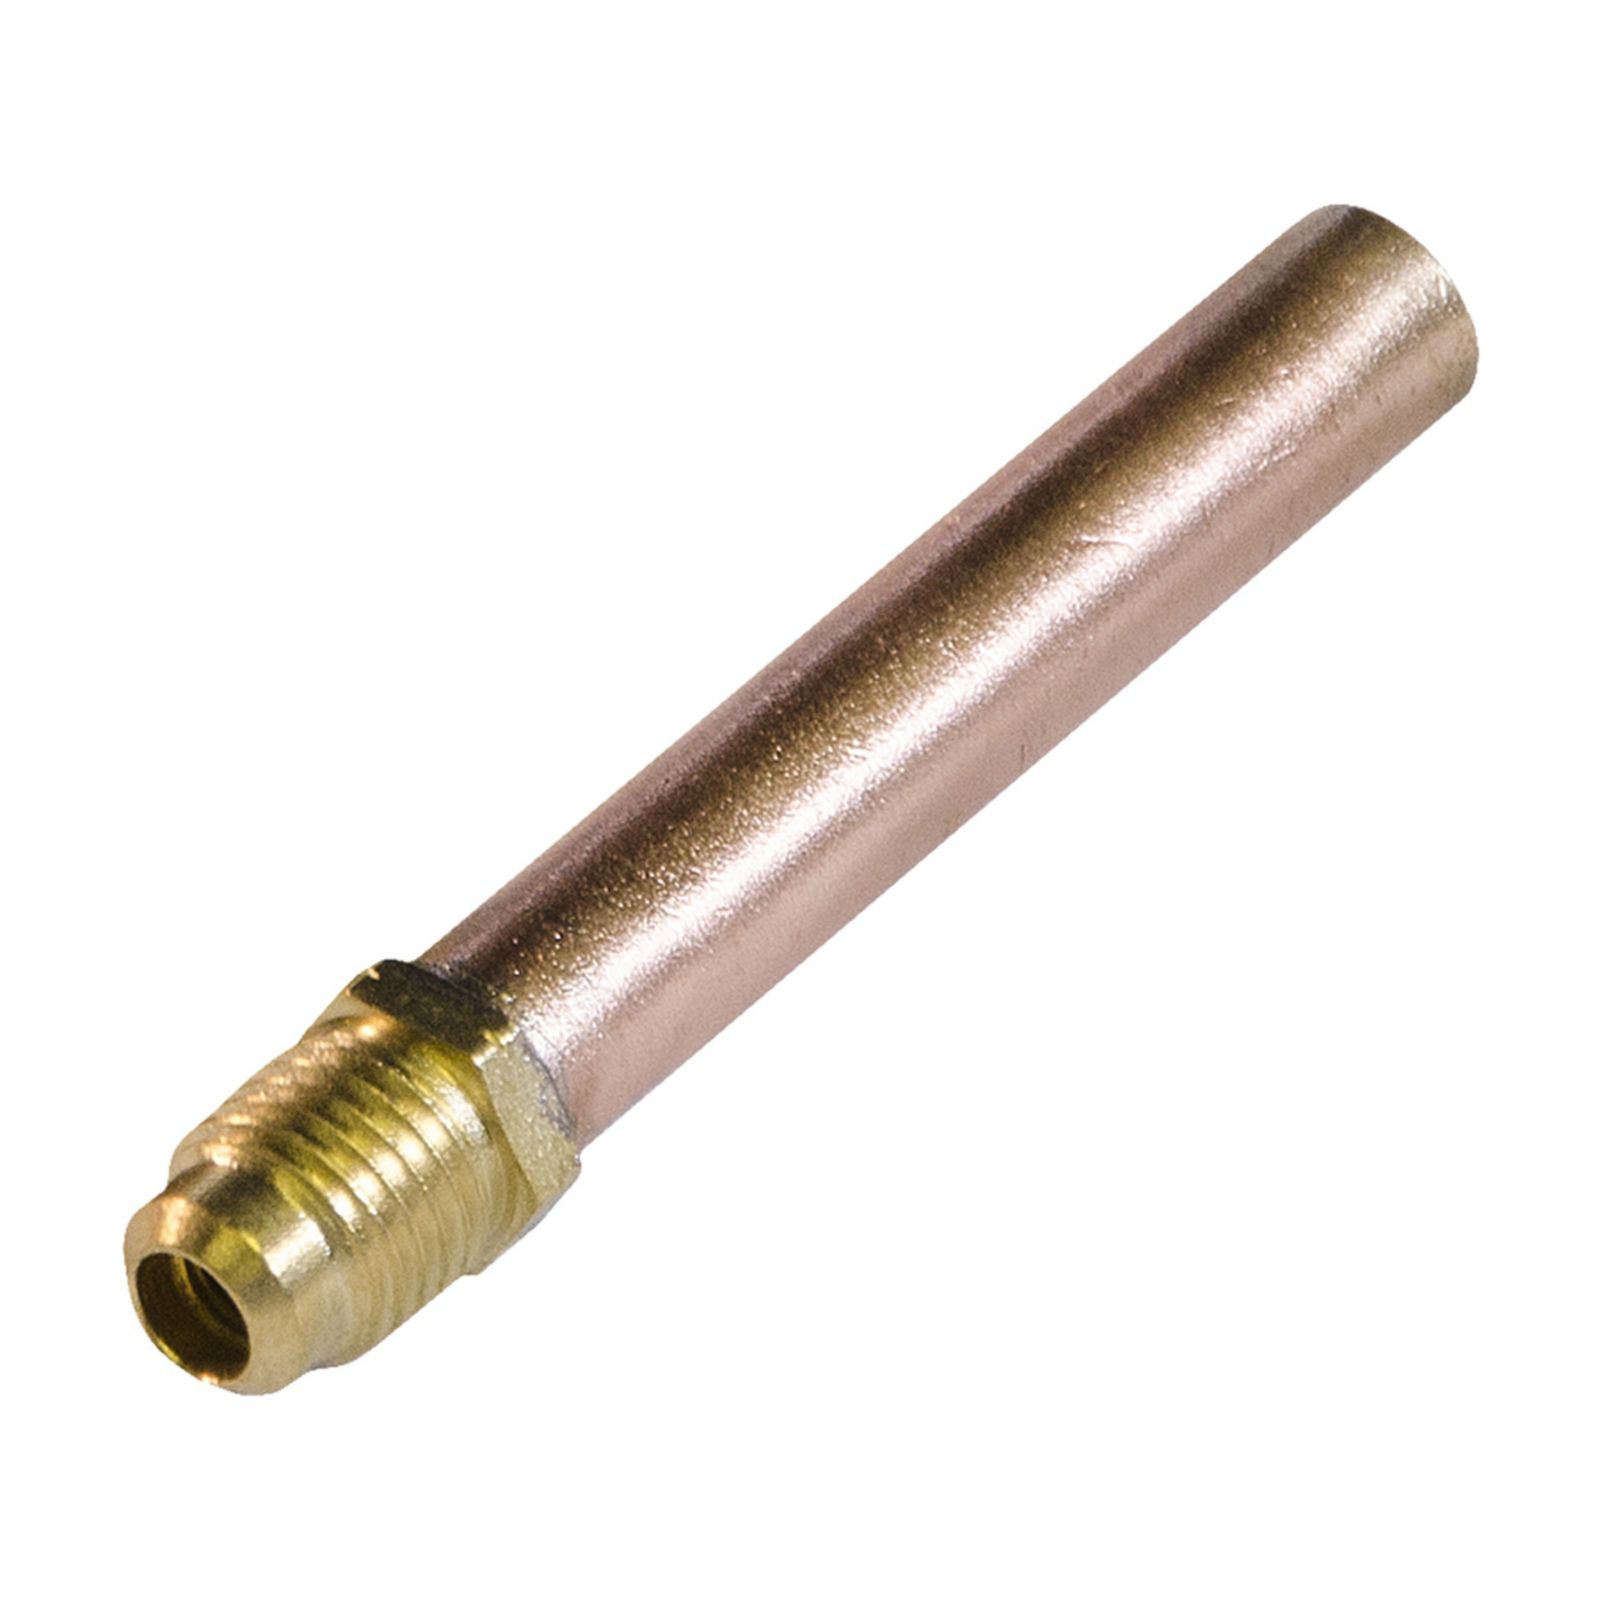 C&D Valve CD3606 - Standard Line Service Valve, Male Flare Access Fitting, 1/4" With Copper Tube Extension, 3/8"